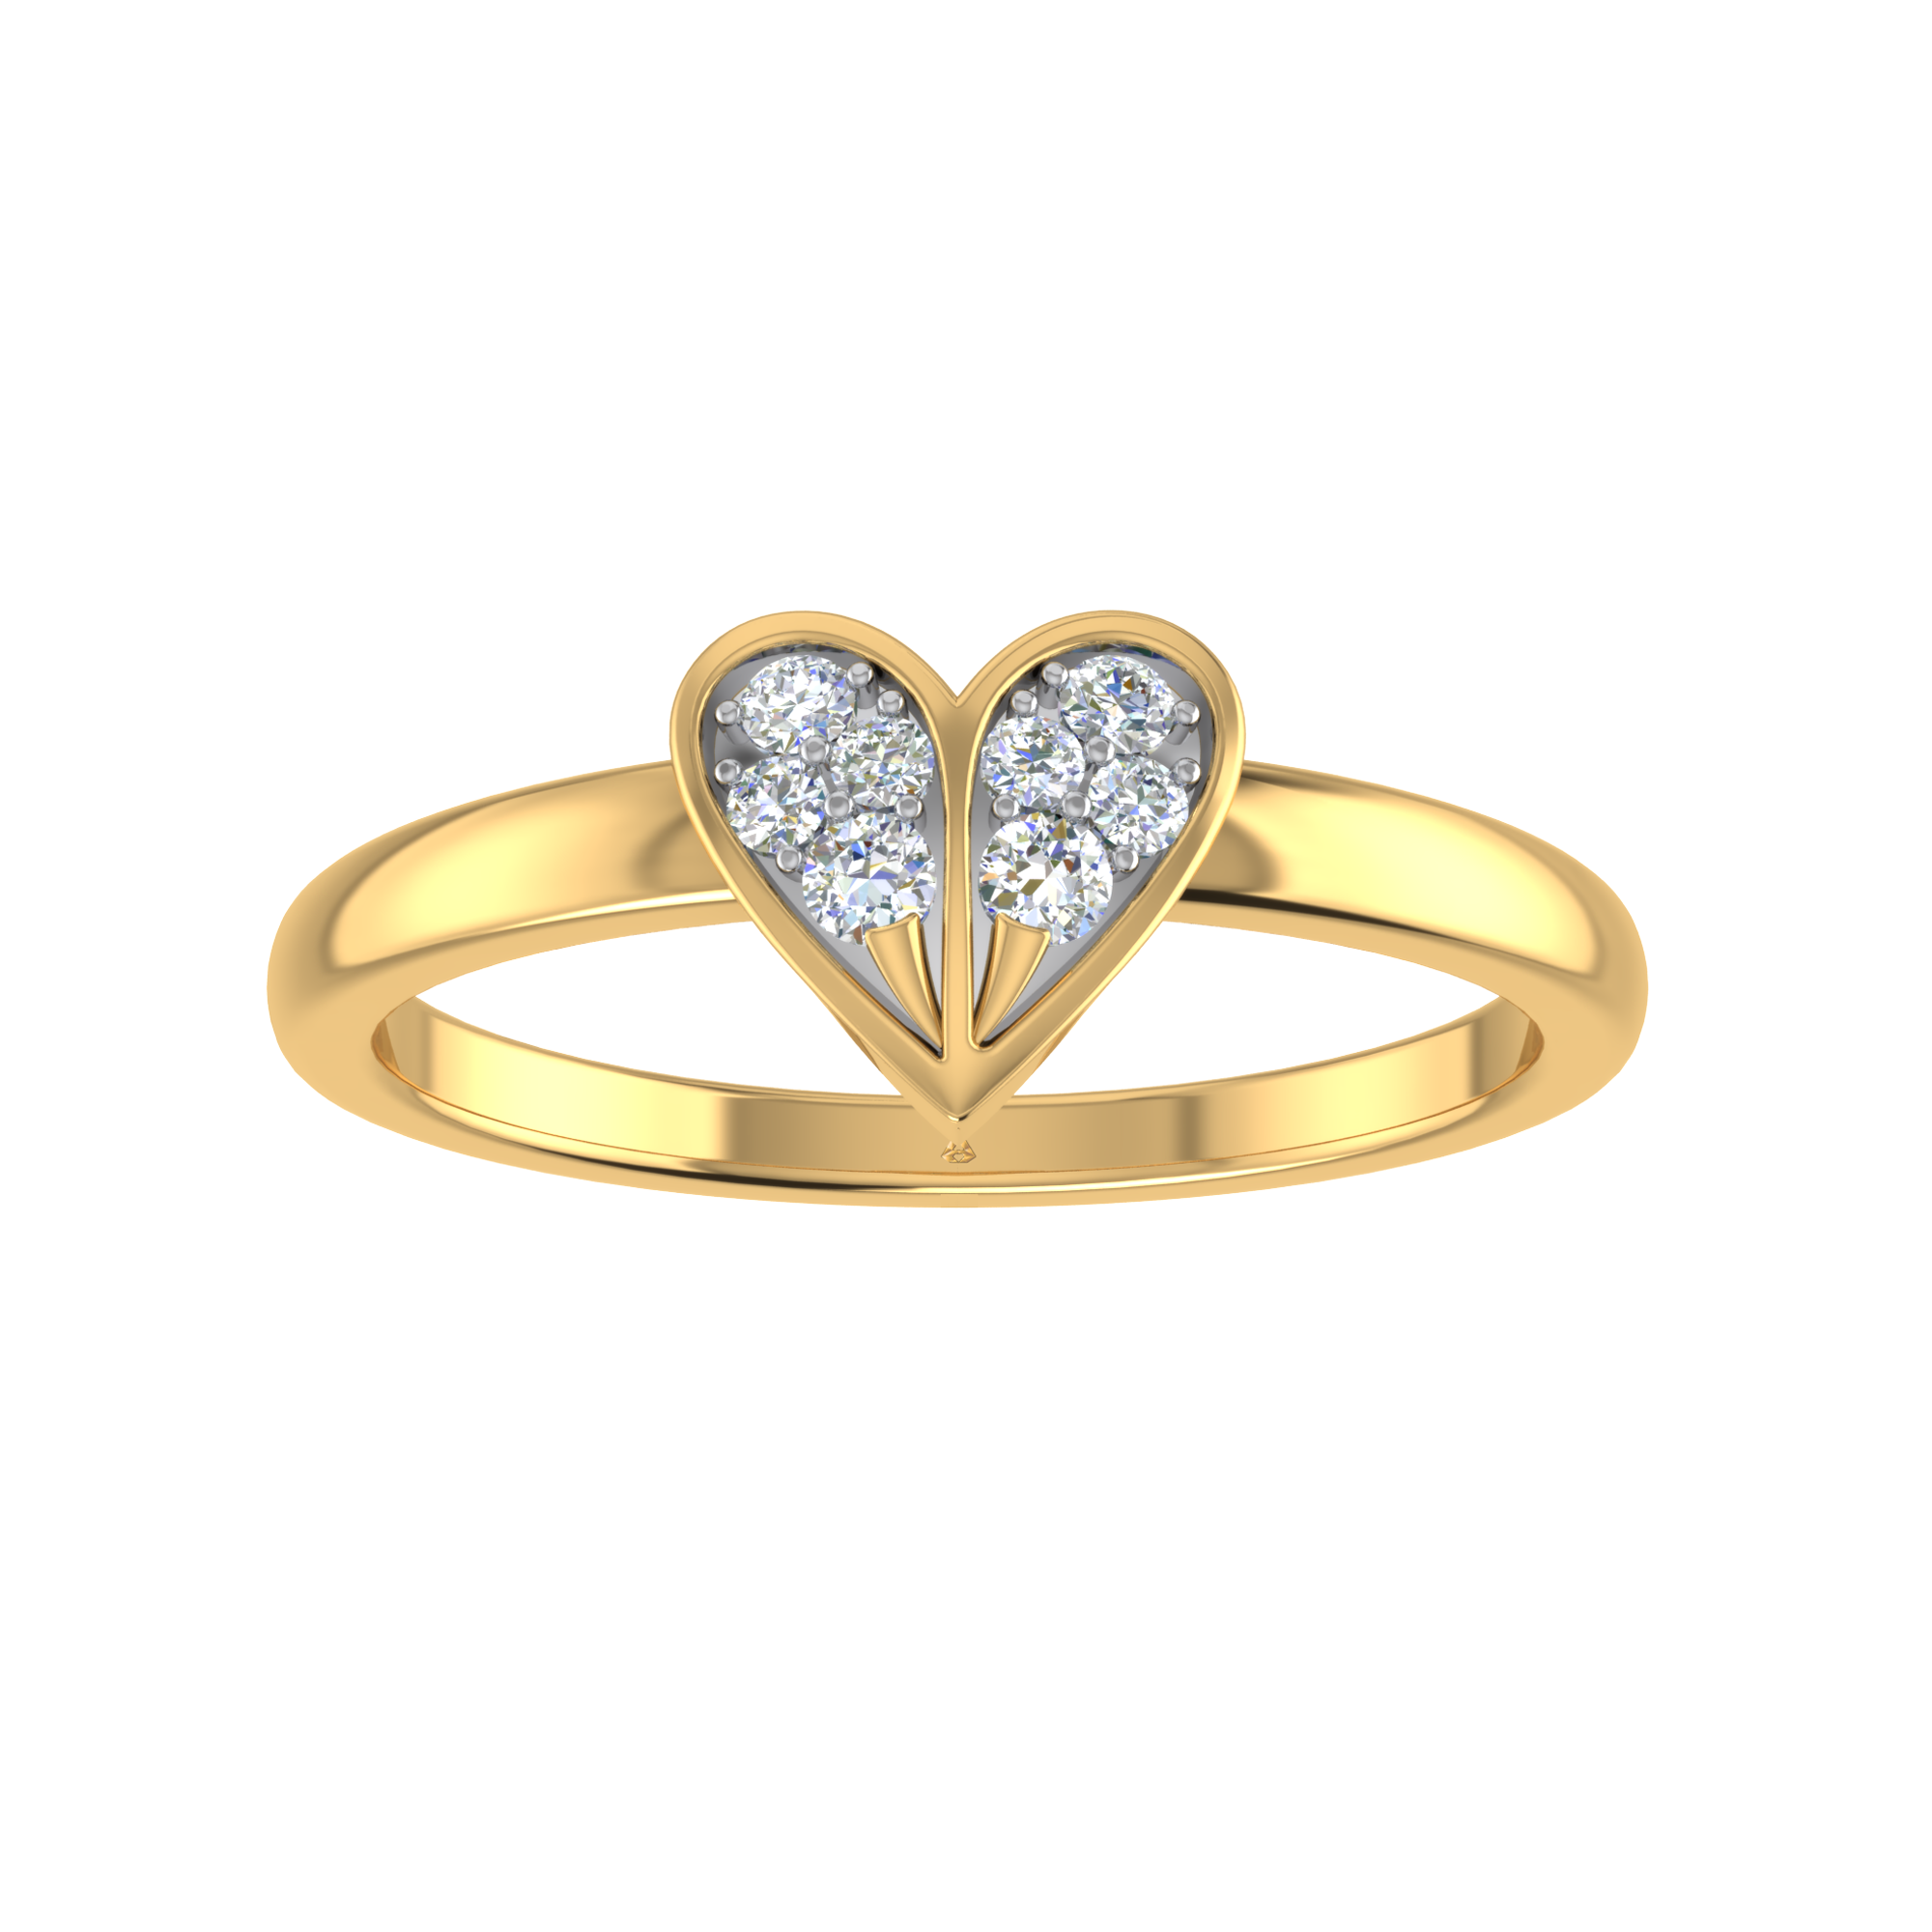 Exquisite 22KT Gold Heart Ring | Bhima Gold Online - Buy Now!